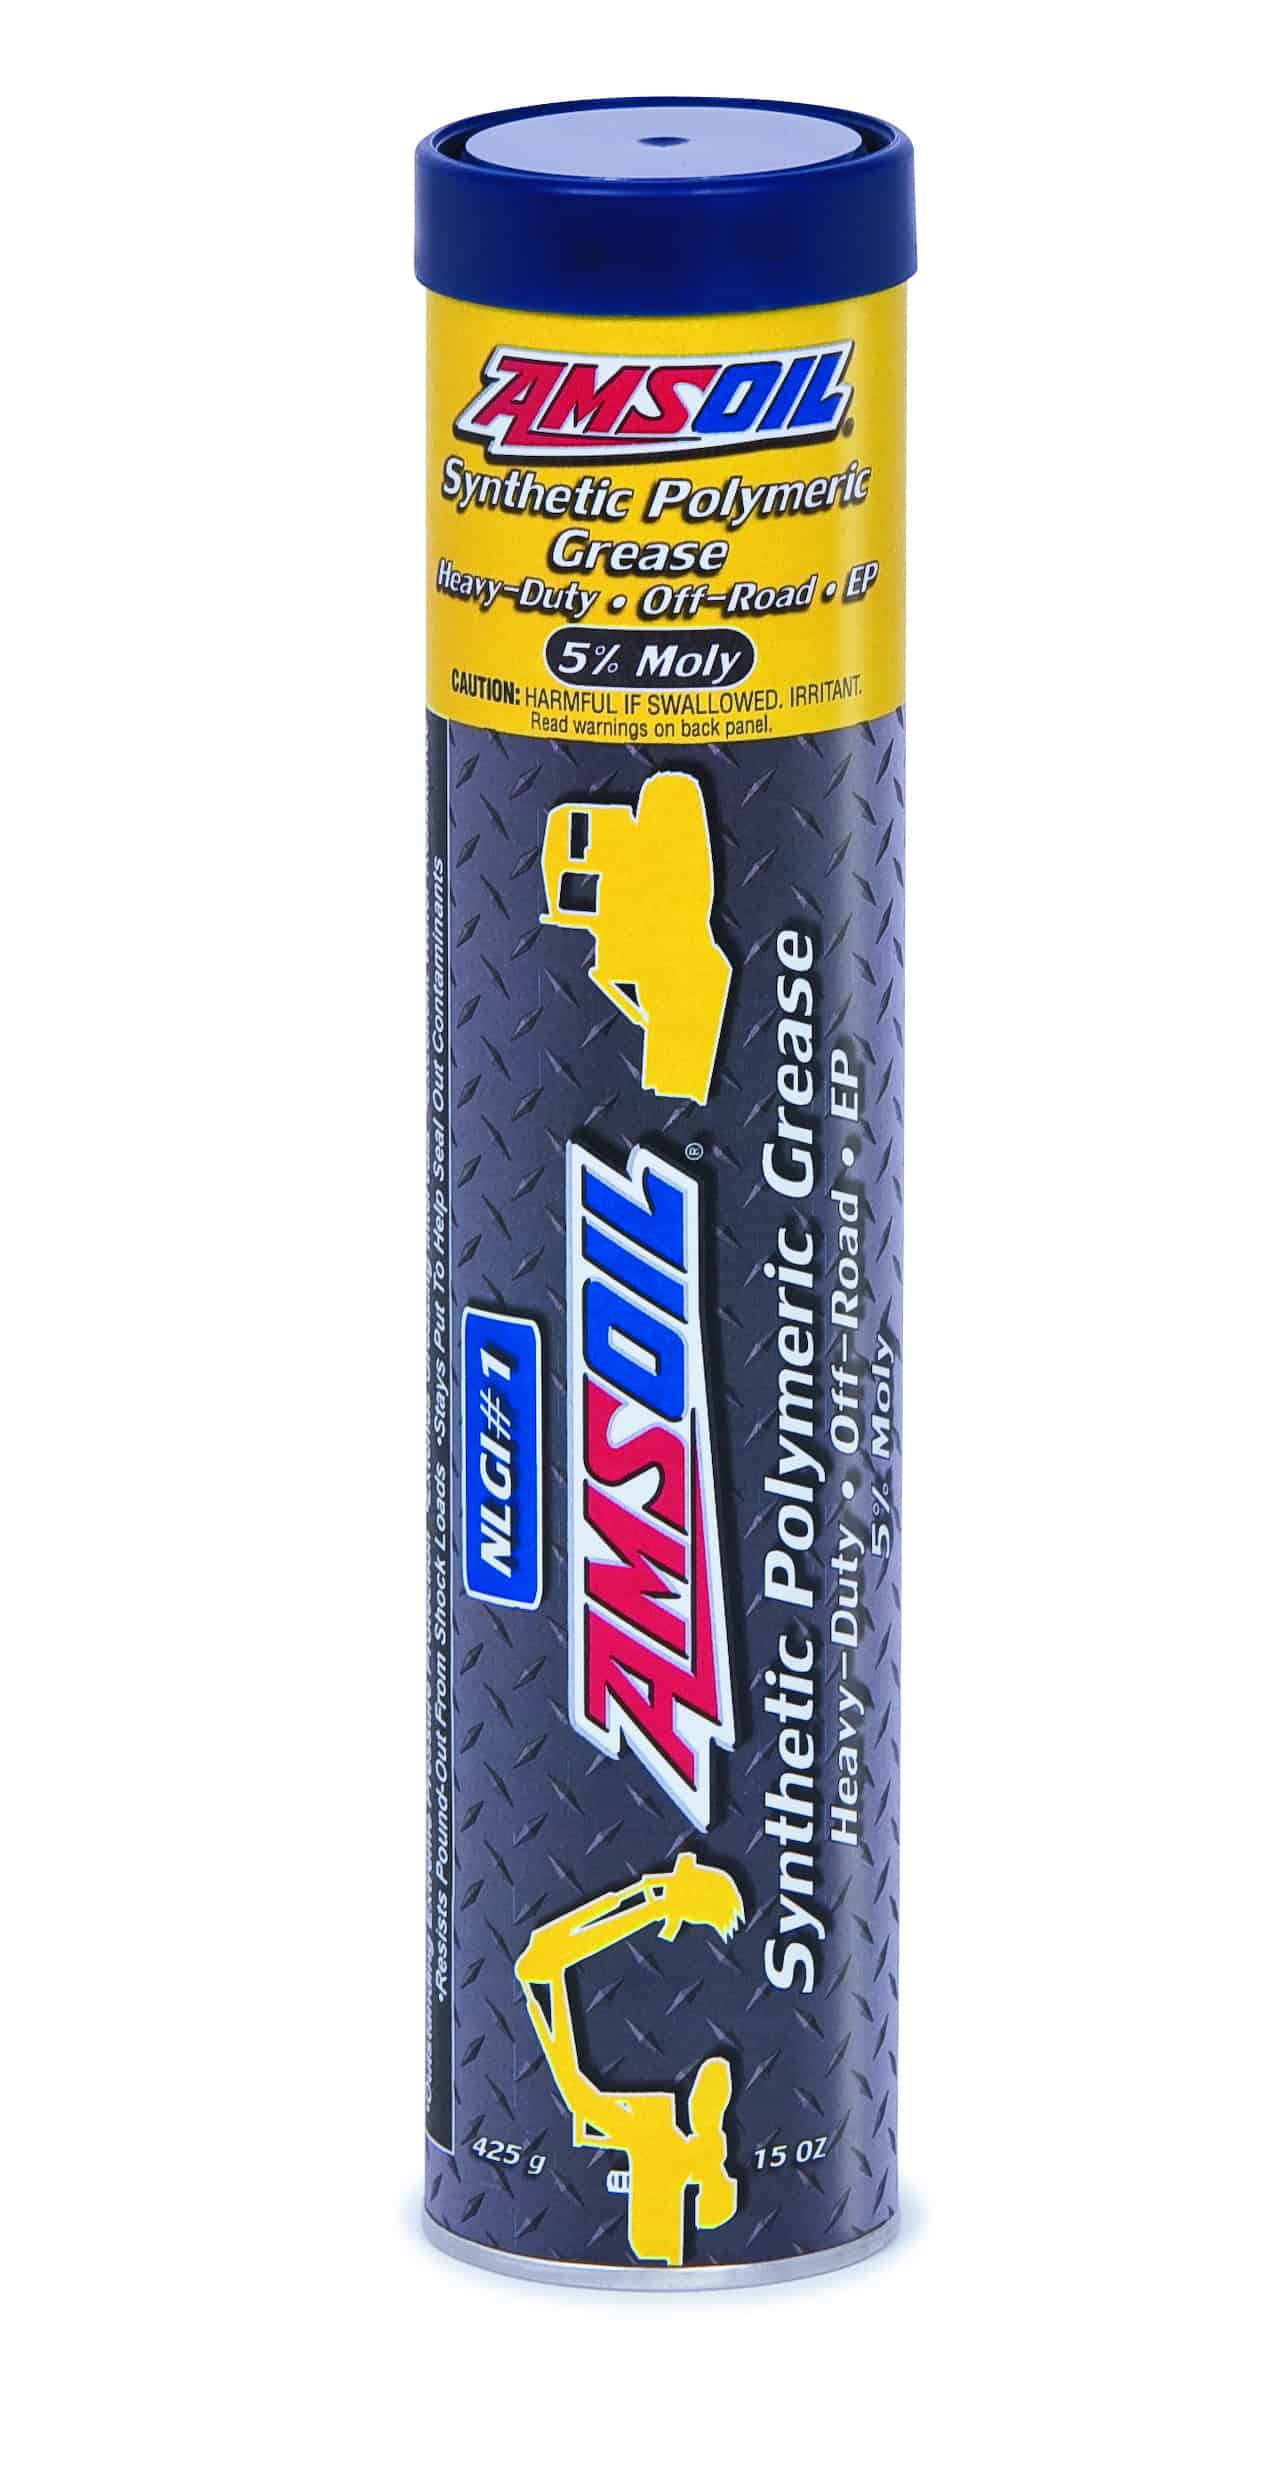 A cartridge of AMSOIL Synthetic Polymeric Off-Road Grease, formulated to provide outstanding performance in heavy-duty off-road applications.